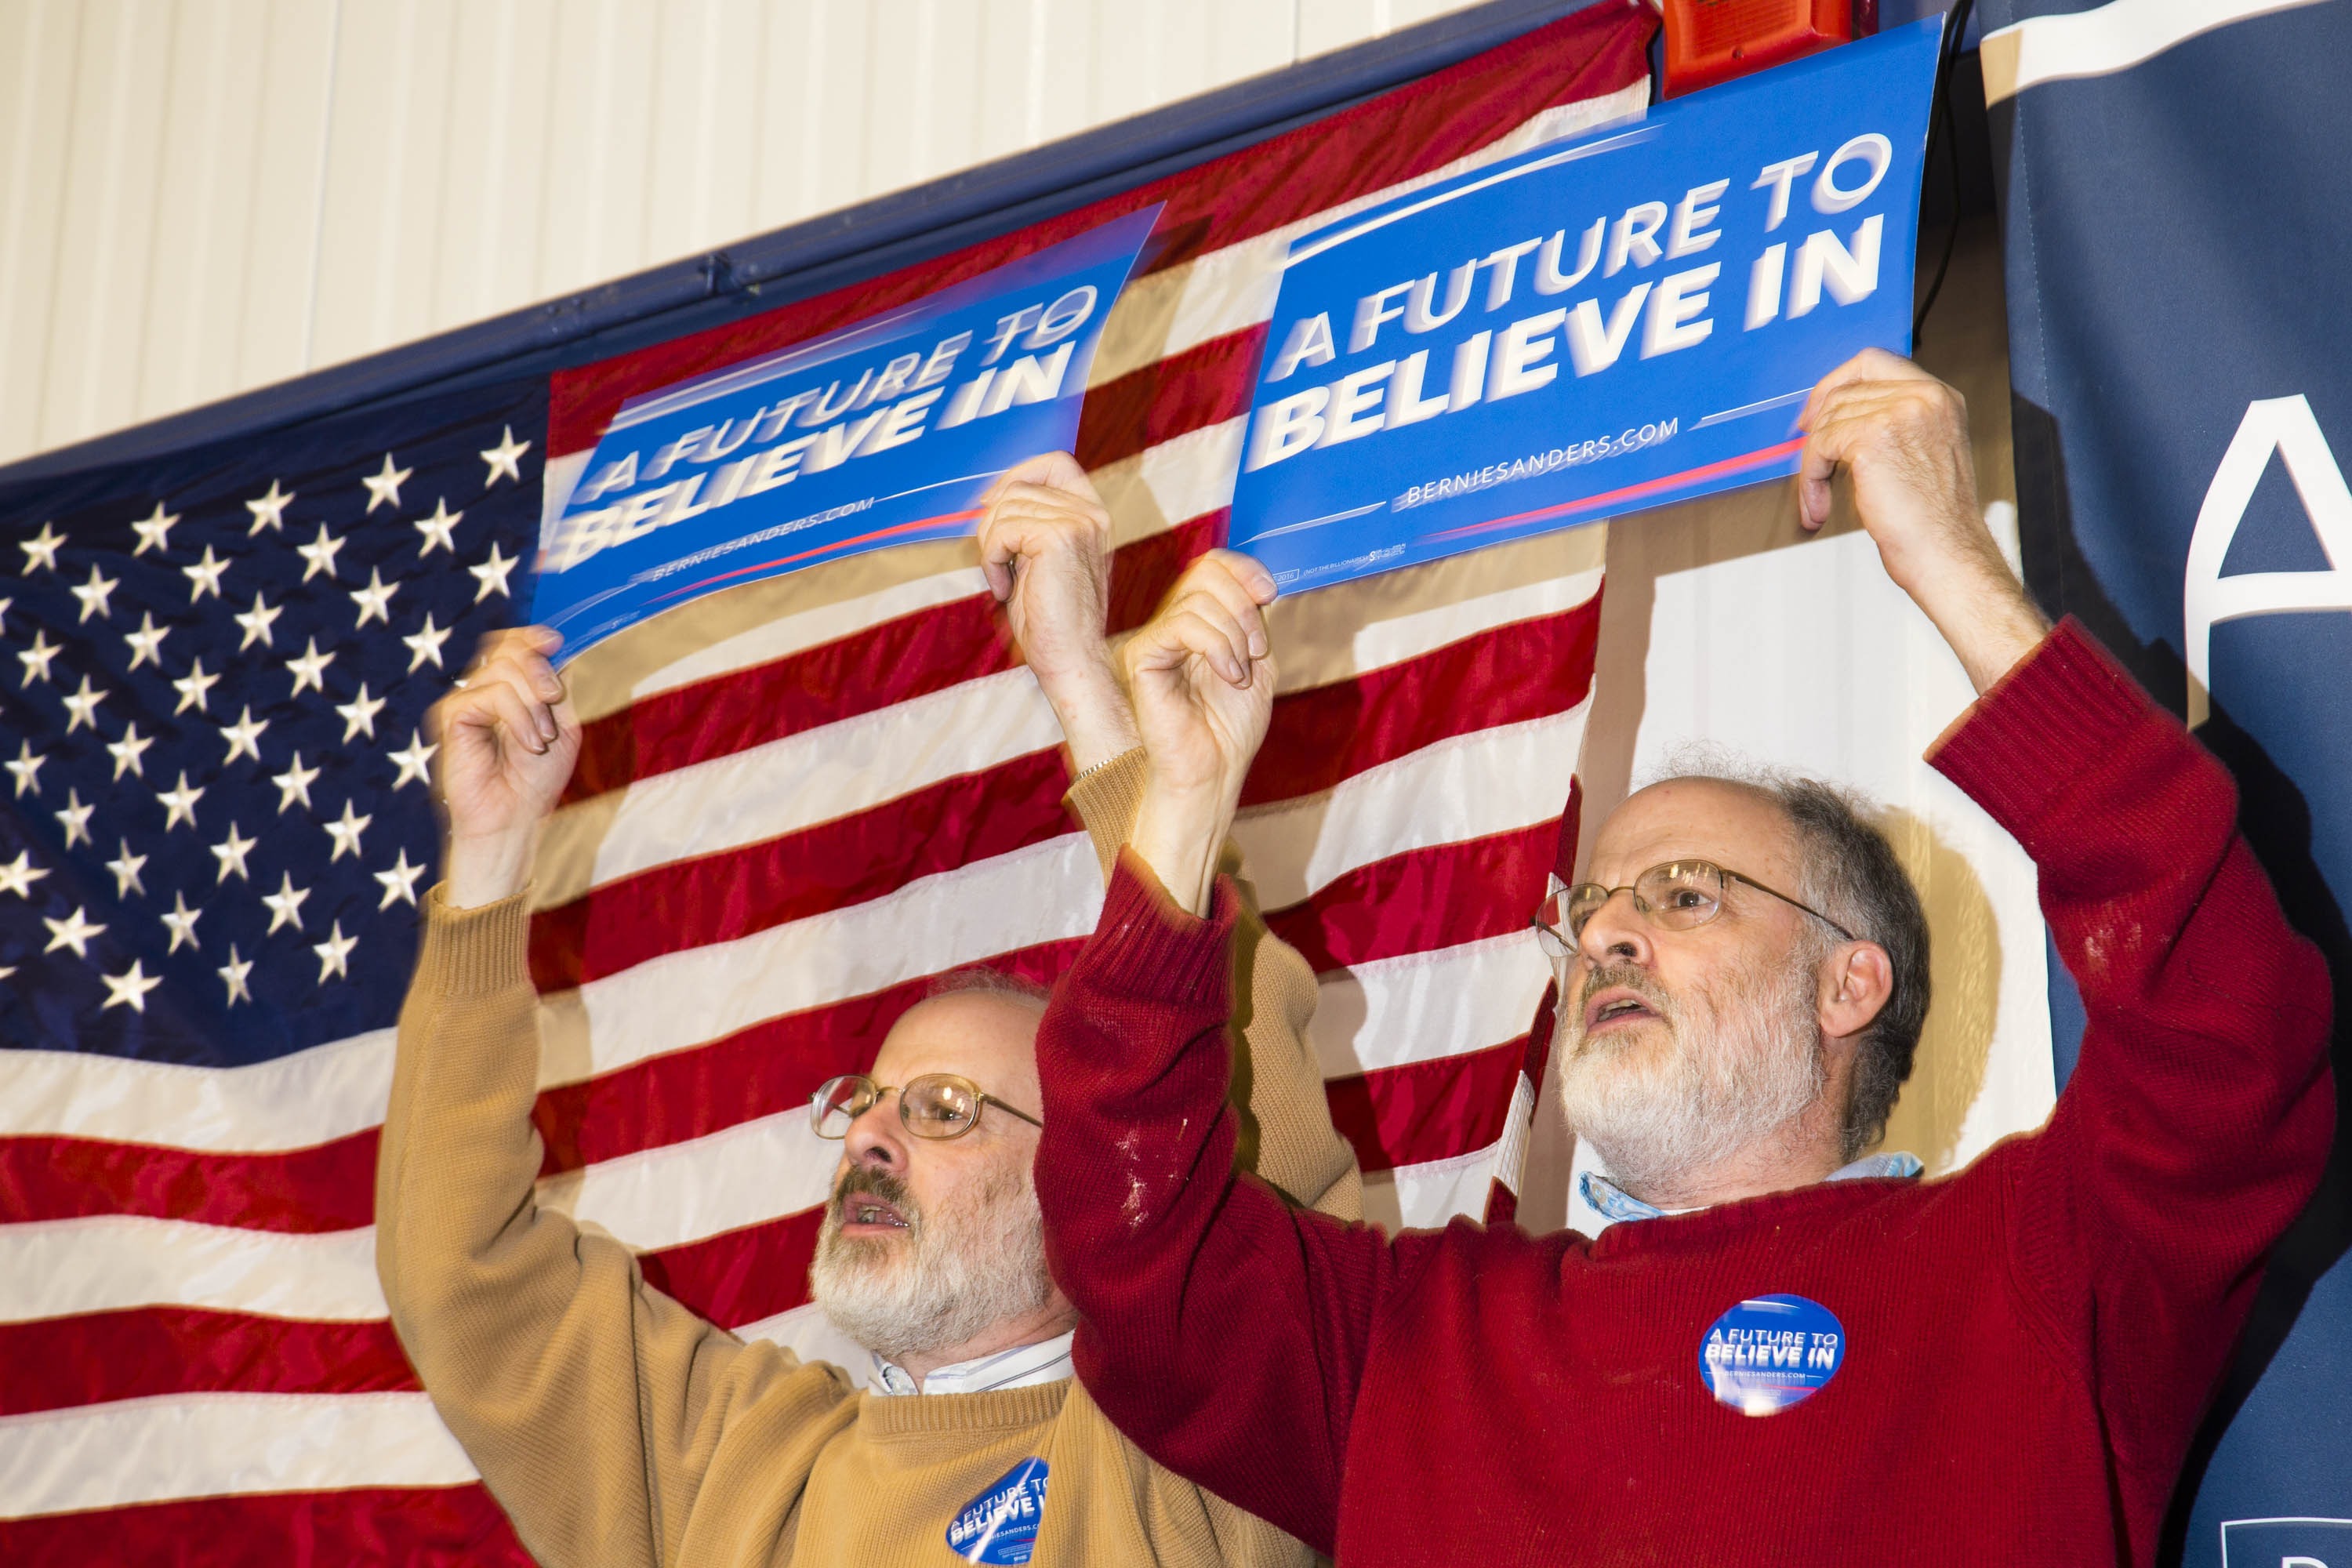 Twins Larry, left, and Bruce Gordon cheer for Democratic presidential candidate, Vermont Sen. Bernie Sanders during a campaign event at Great Bay Community College on Feb. 7, 2016, in Portsmouth, N.H.